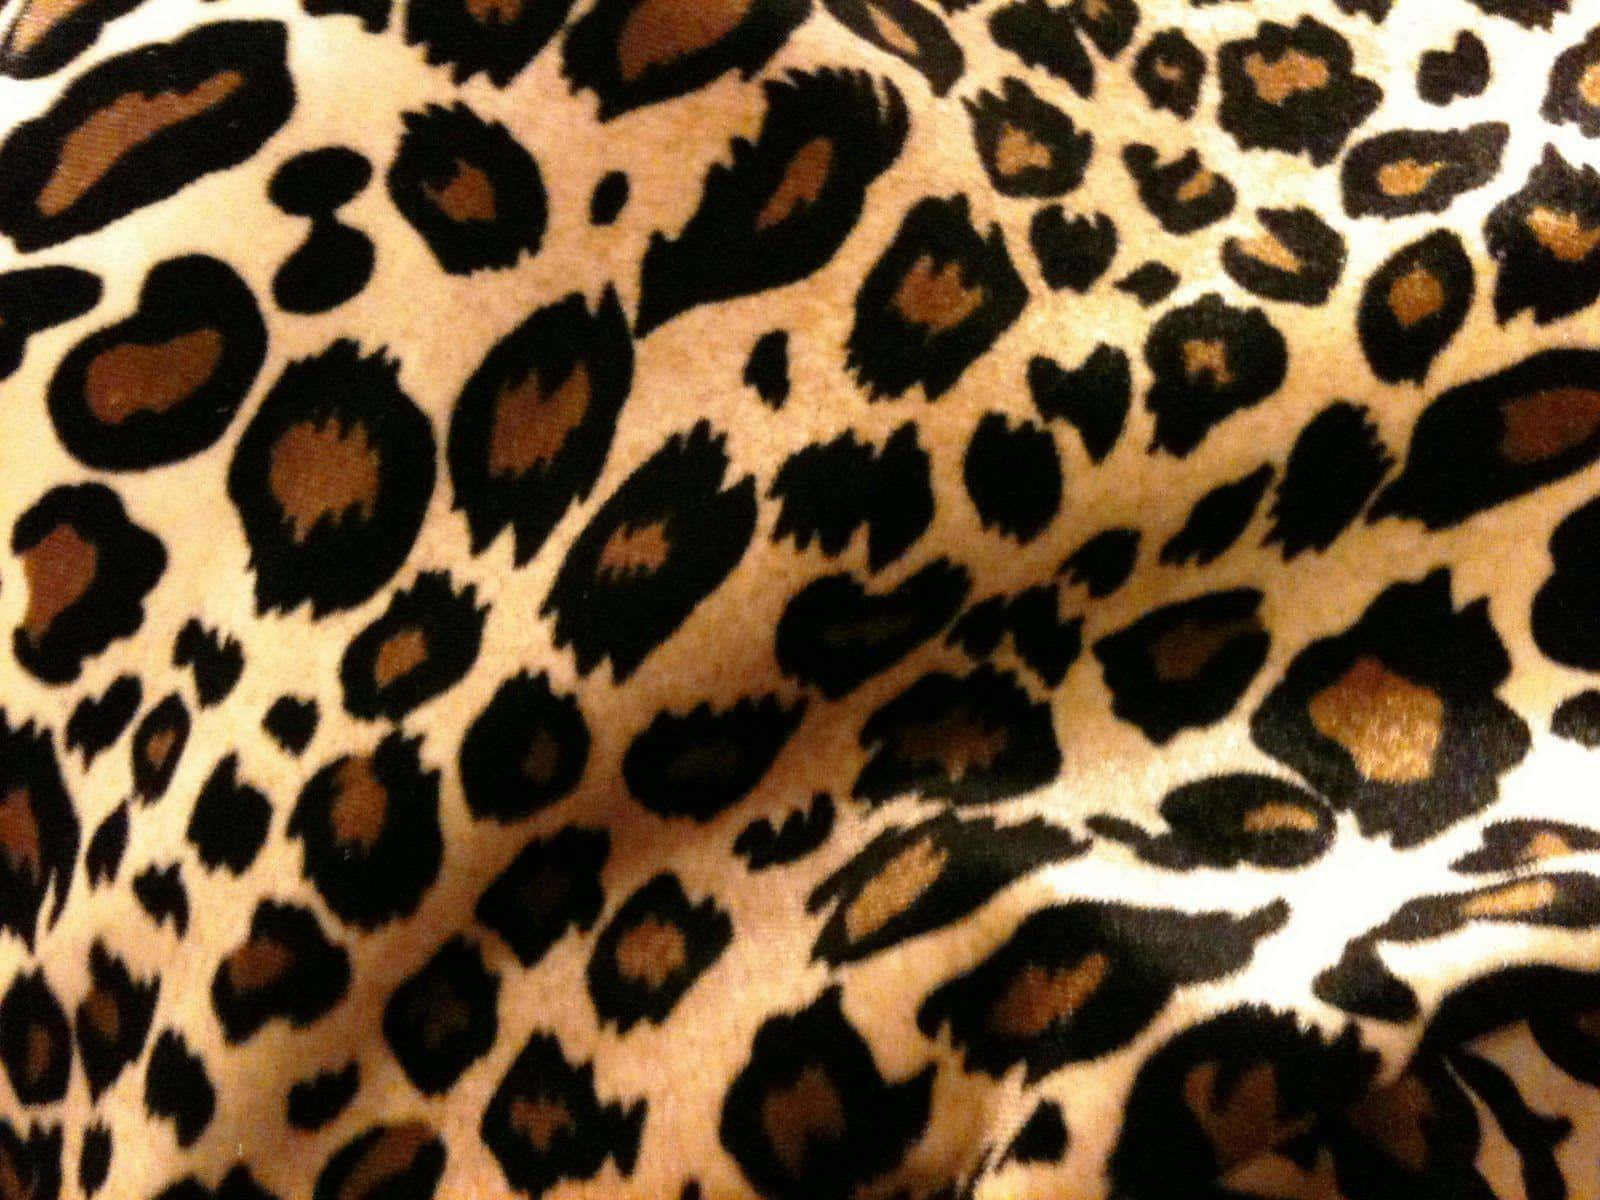 Our favorite cheetah print is here - and it's sure to make a bold statement!